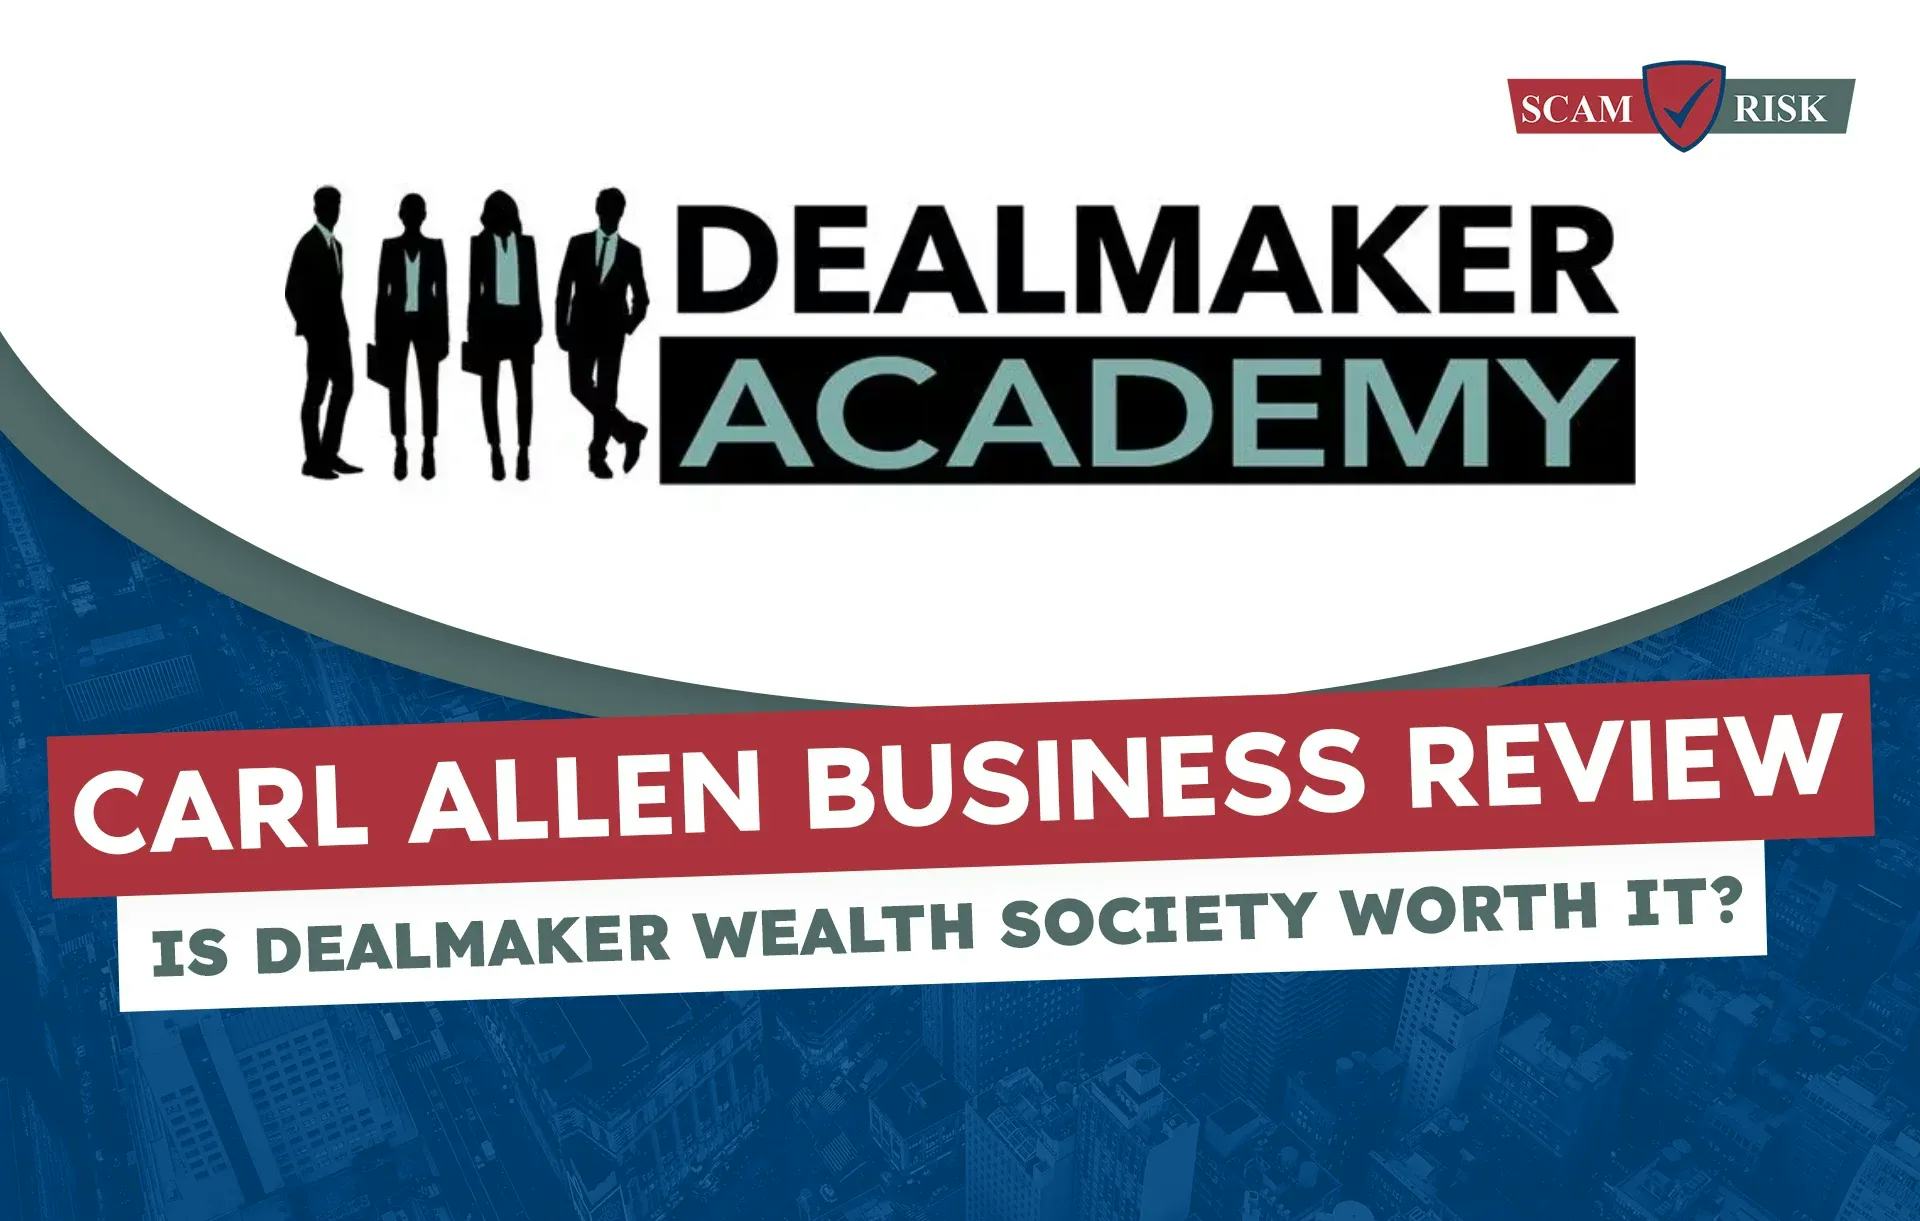 Carl Allen Business Review ([year] Update): Is Dealmaker Wealth Society Worth It?